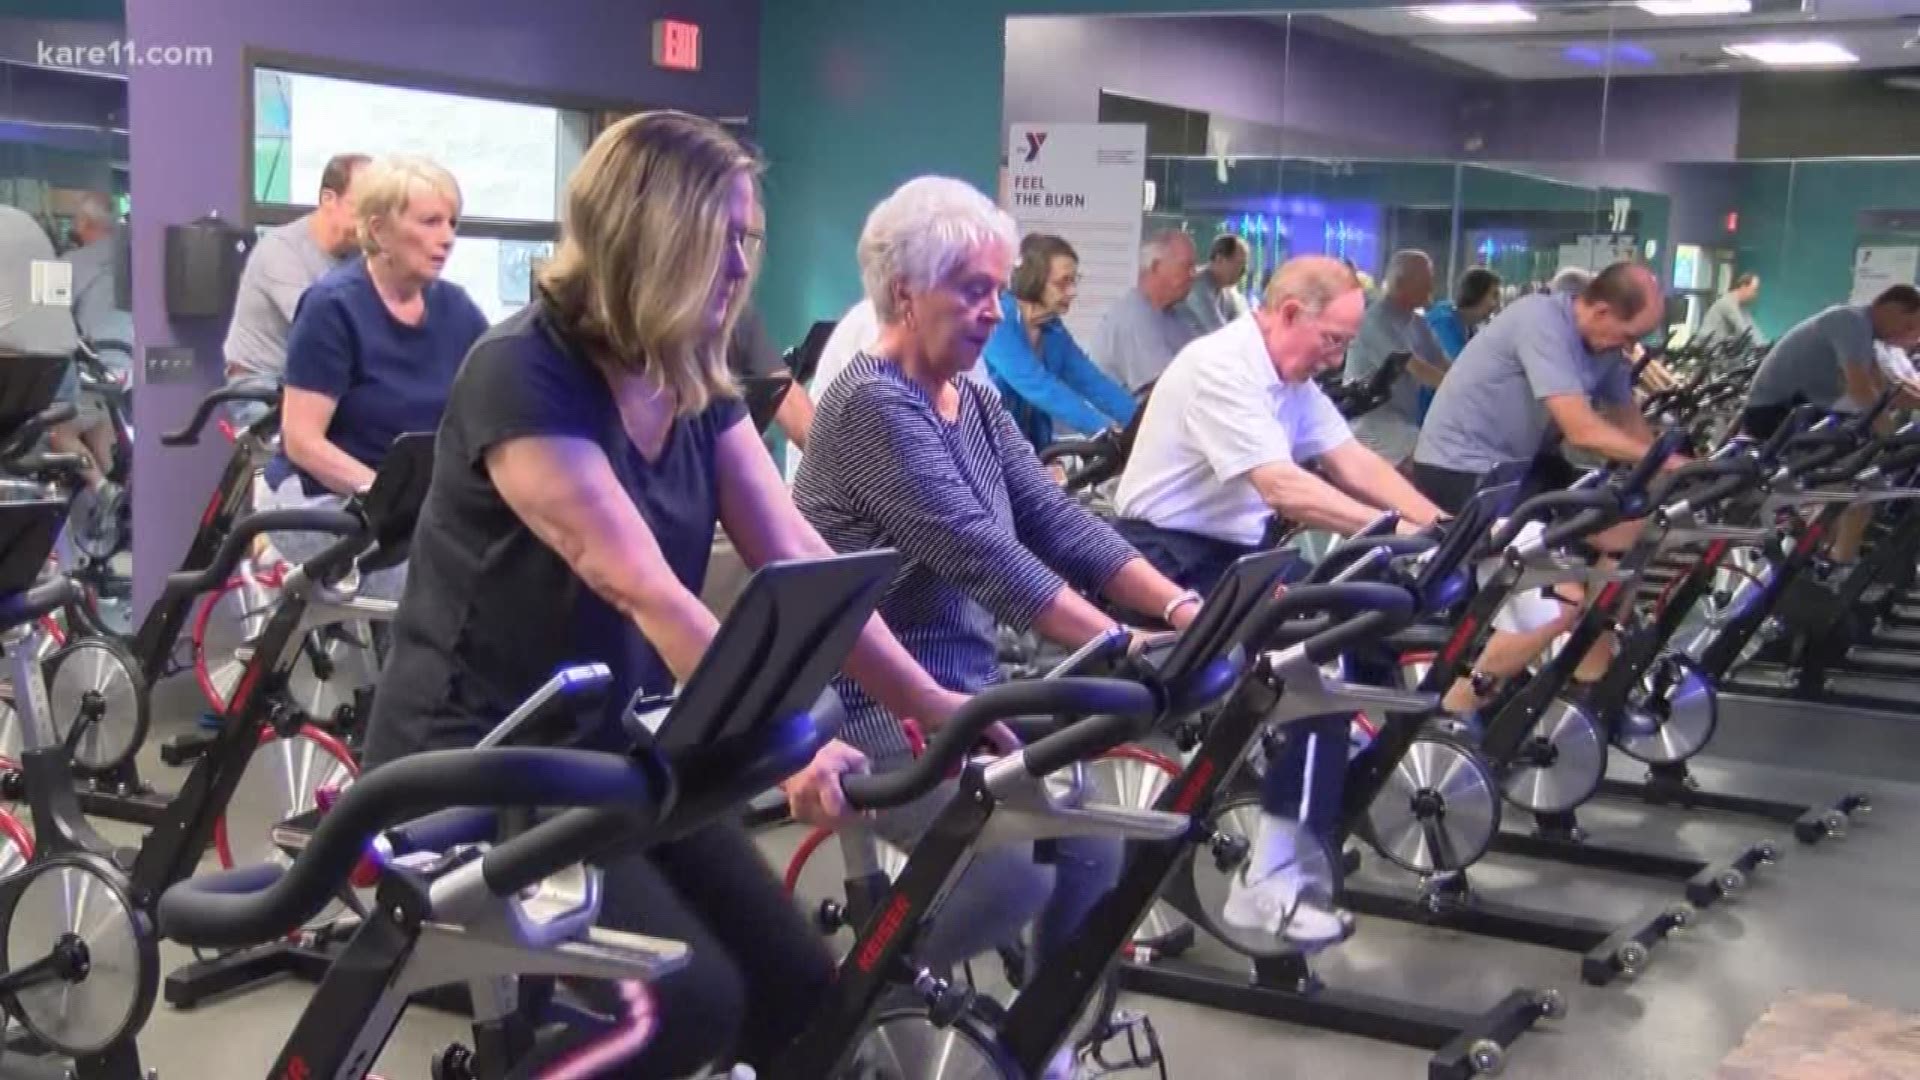 Some Parkinson’s patients are using stationary bikes to help reduce tremors and improve their quality of life.